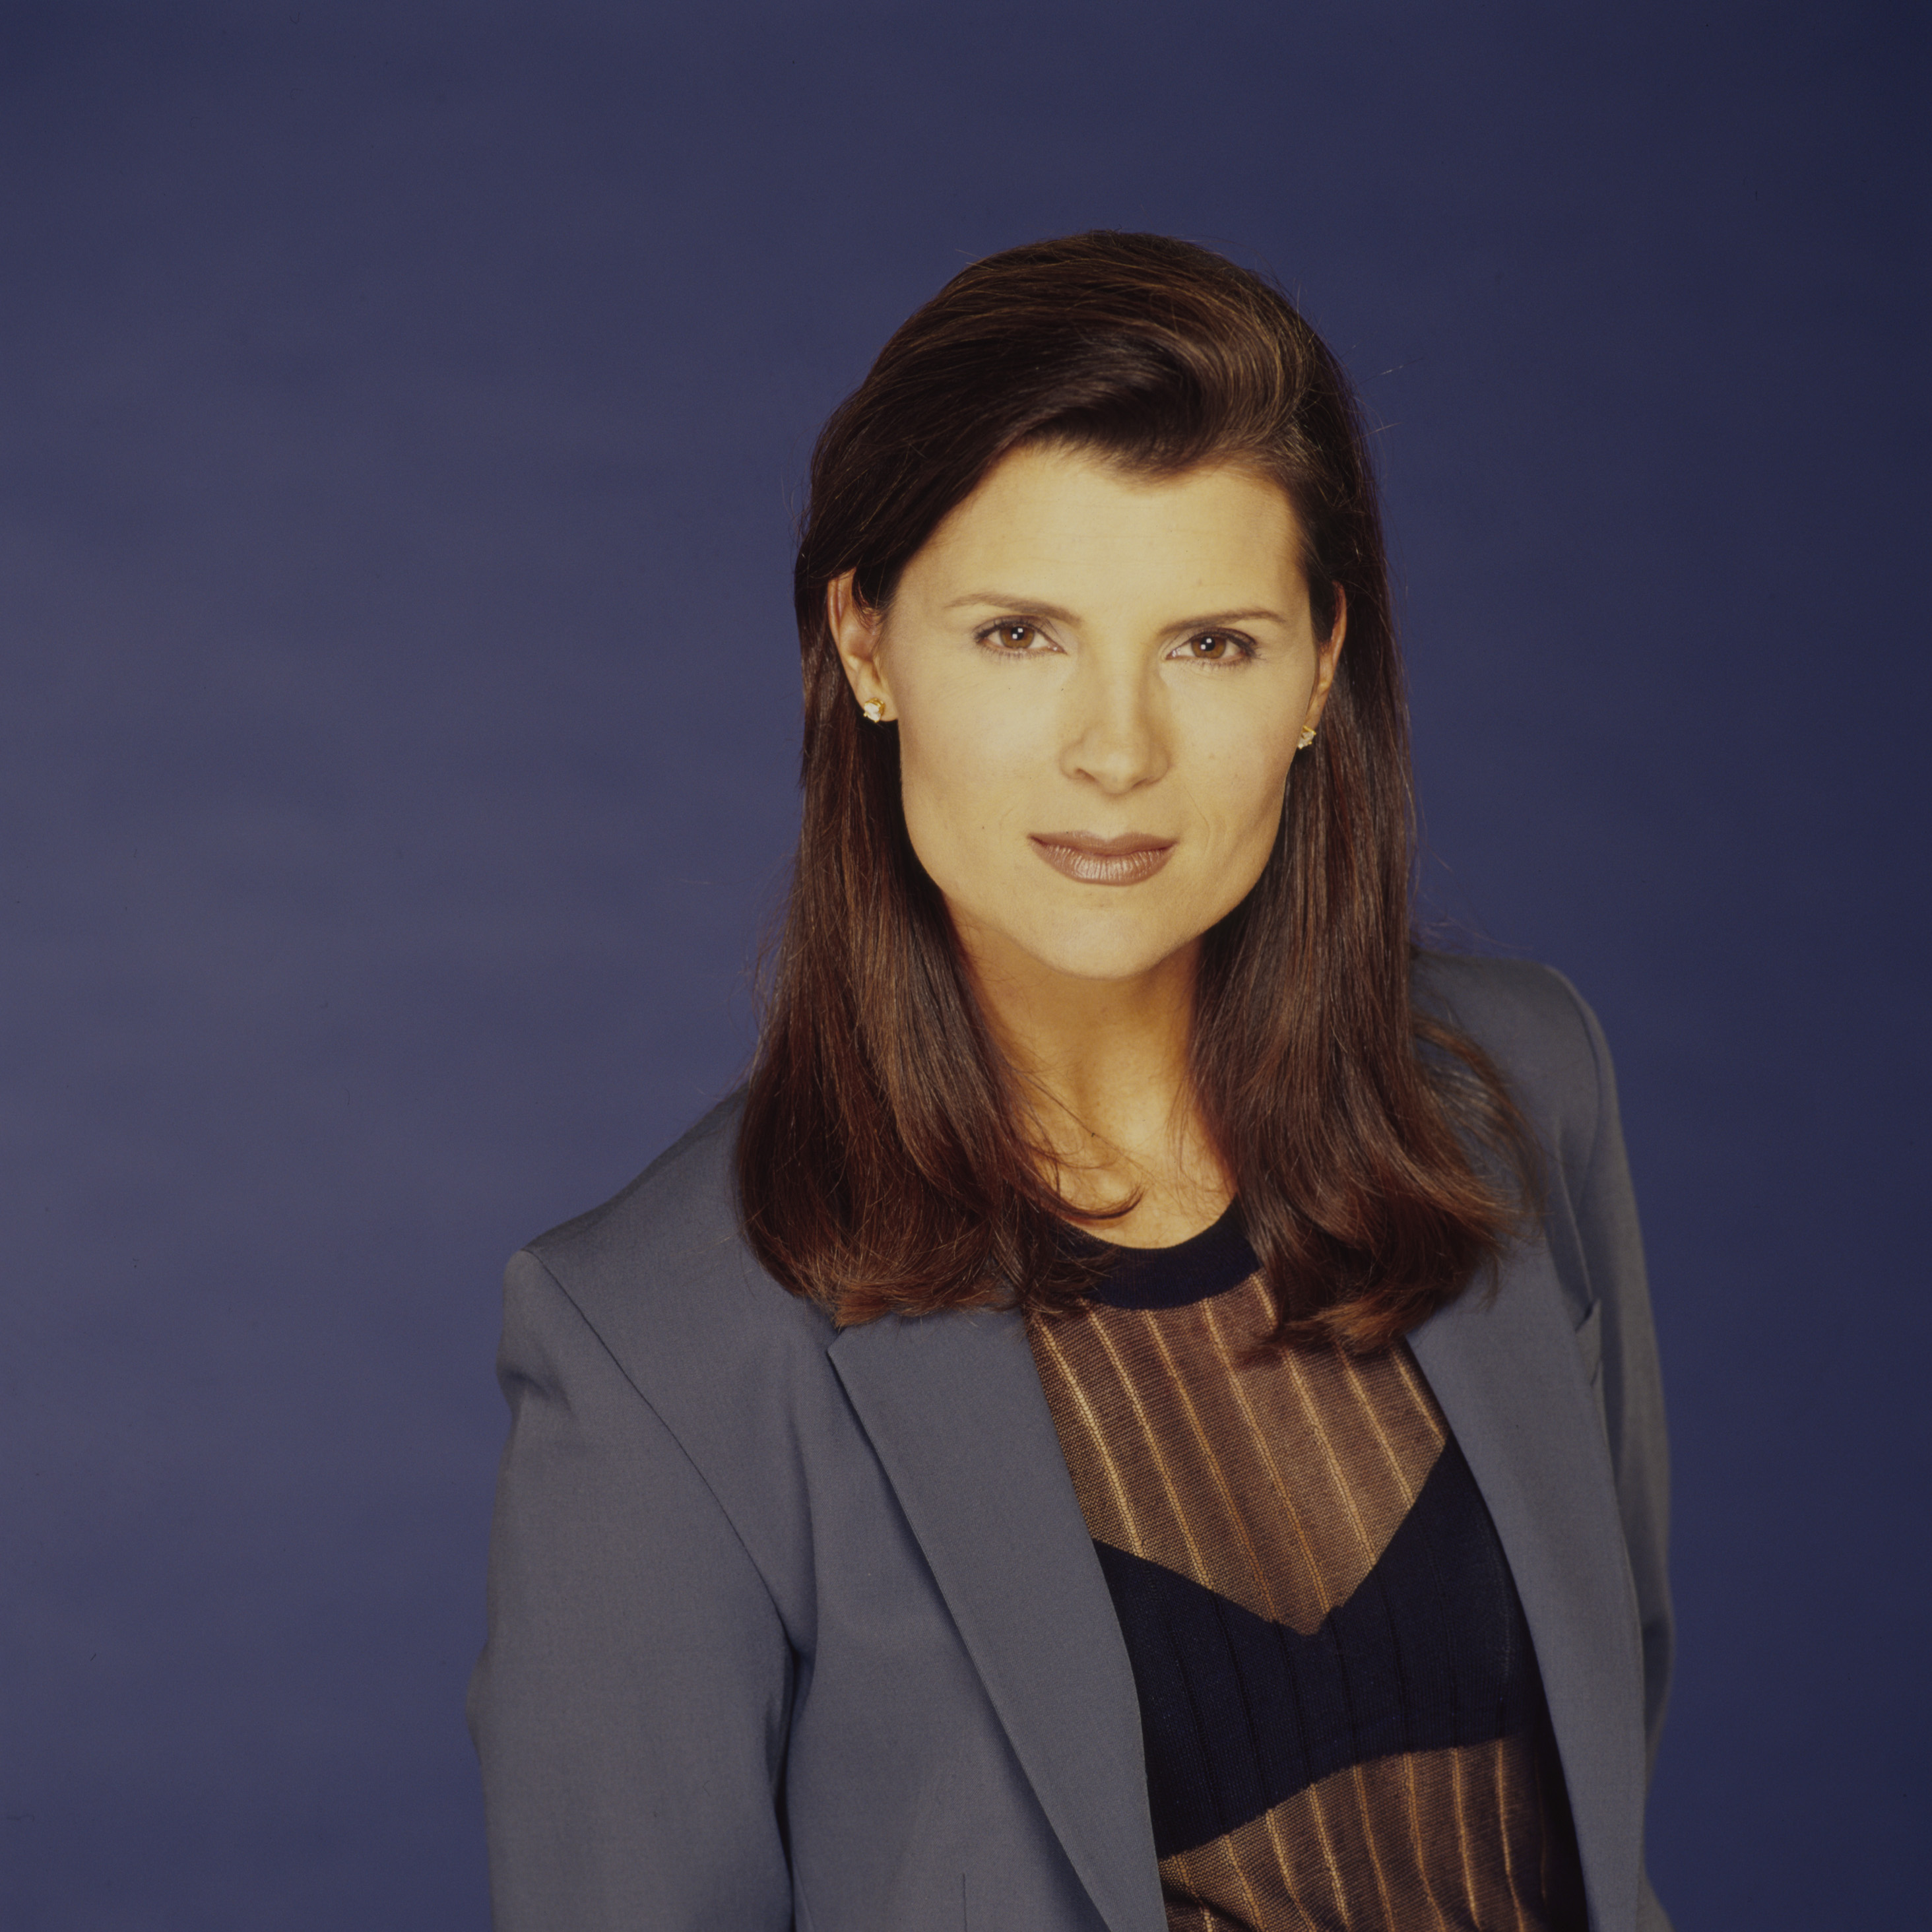 'The Bold and the Beautiful' actor Kimberlin Brown wearing a blue suit and standing in front of a blue backdrop.